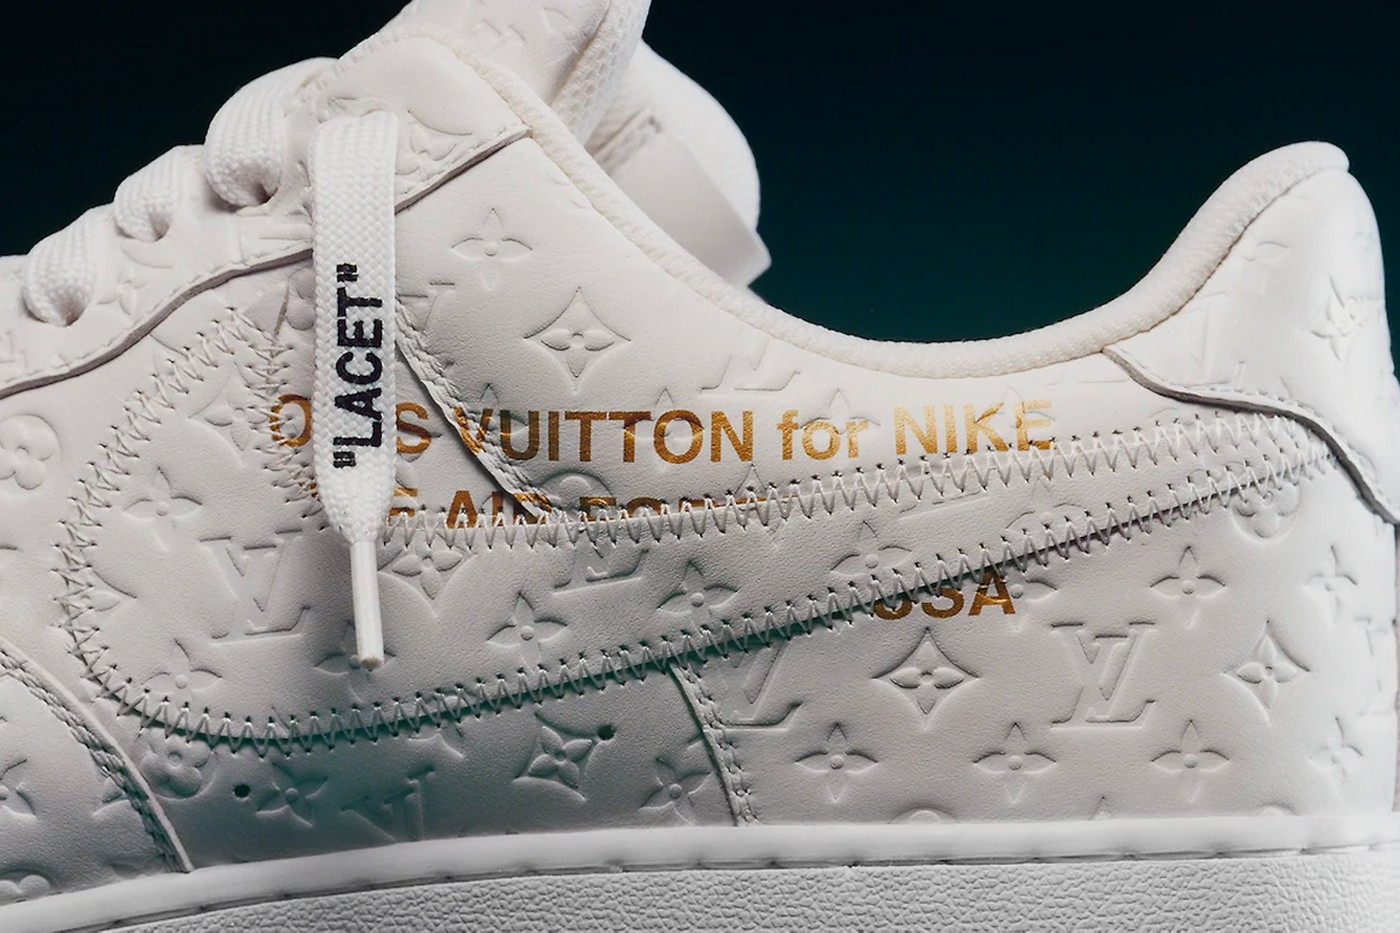 As the work of the late Virgil Abloh, the Louis Vuitton x Nike sneakers became profoundly meaningful. Photo: Louis Vuitton